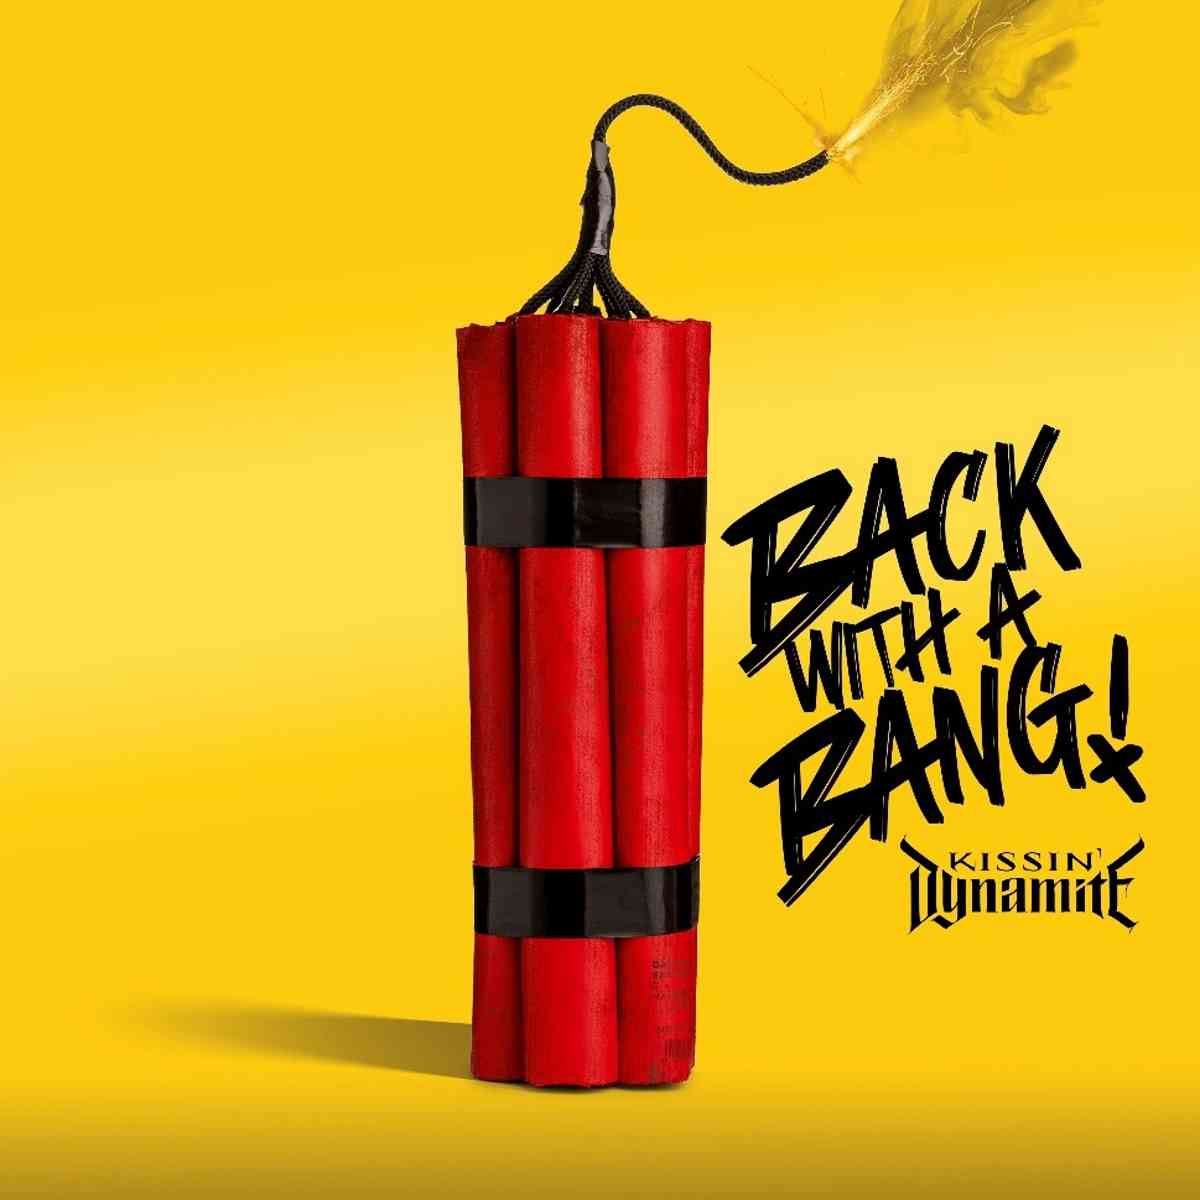 KISSIN DYNAMITE - back with a bang - album cover